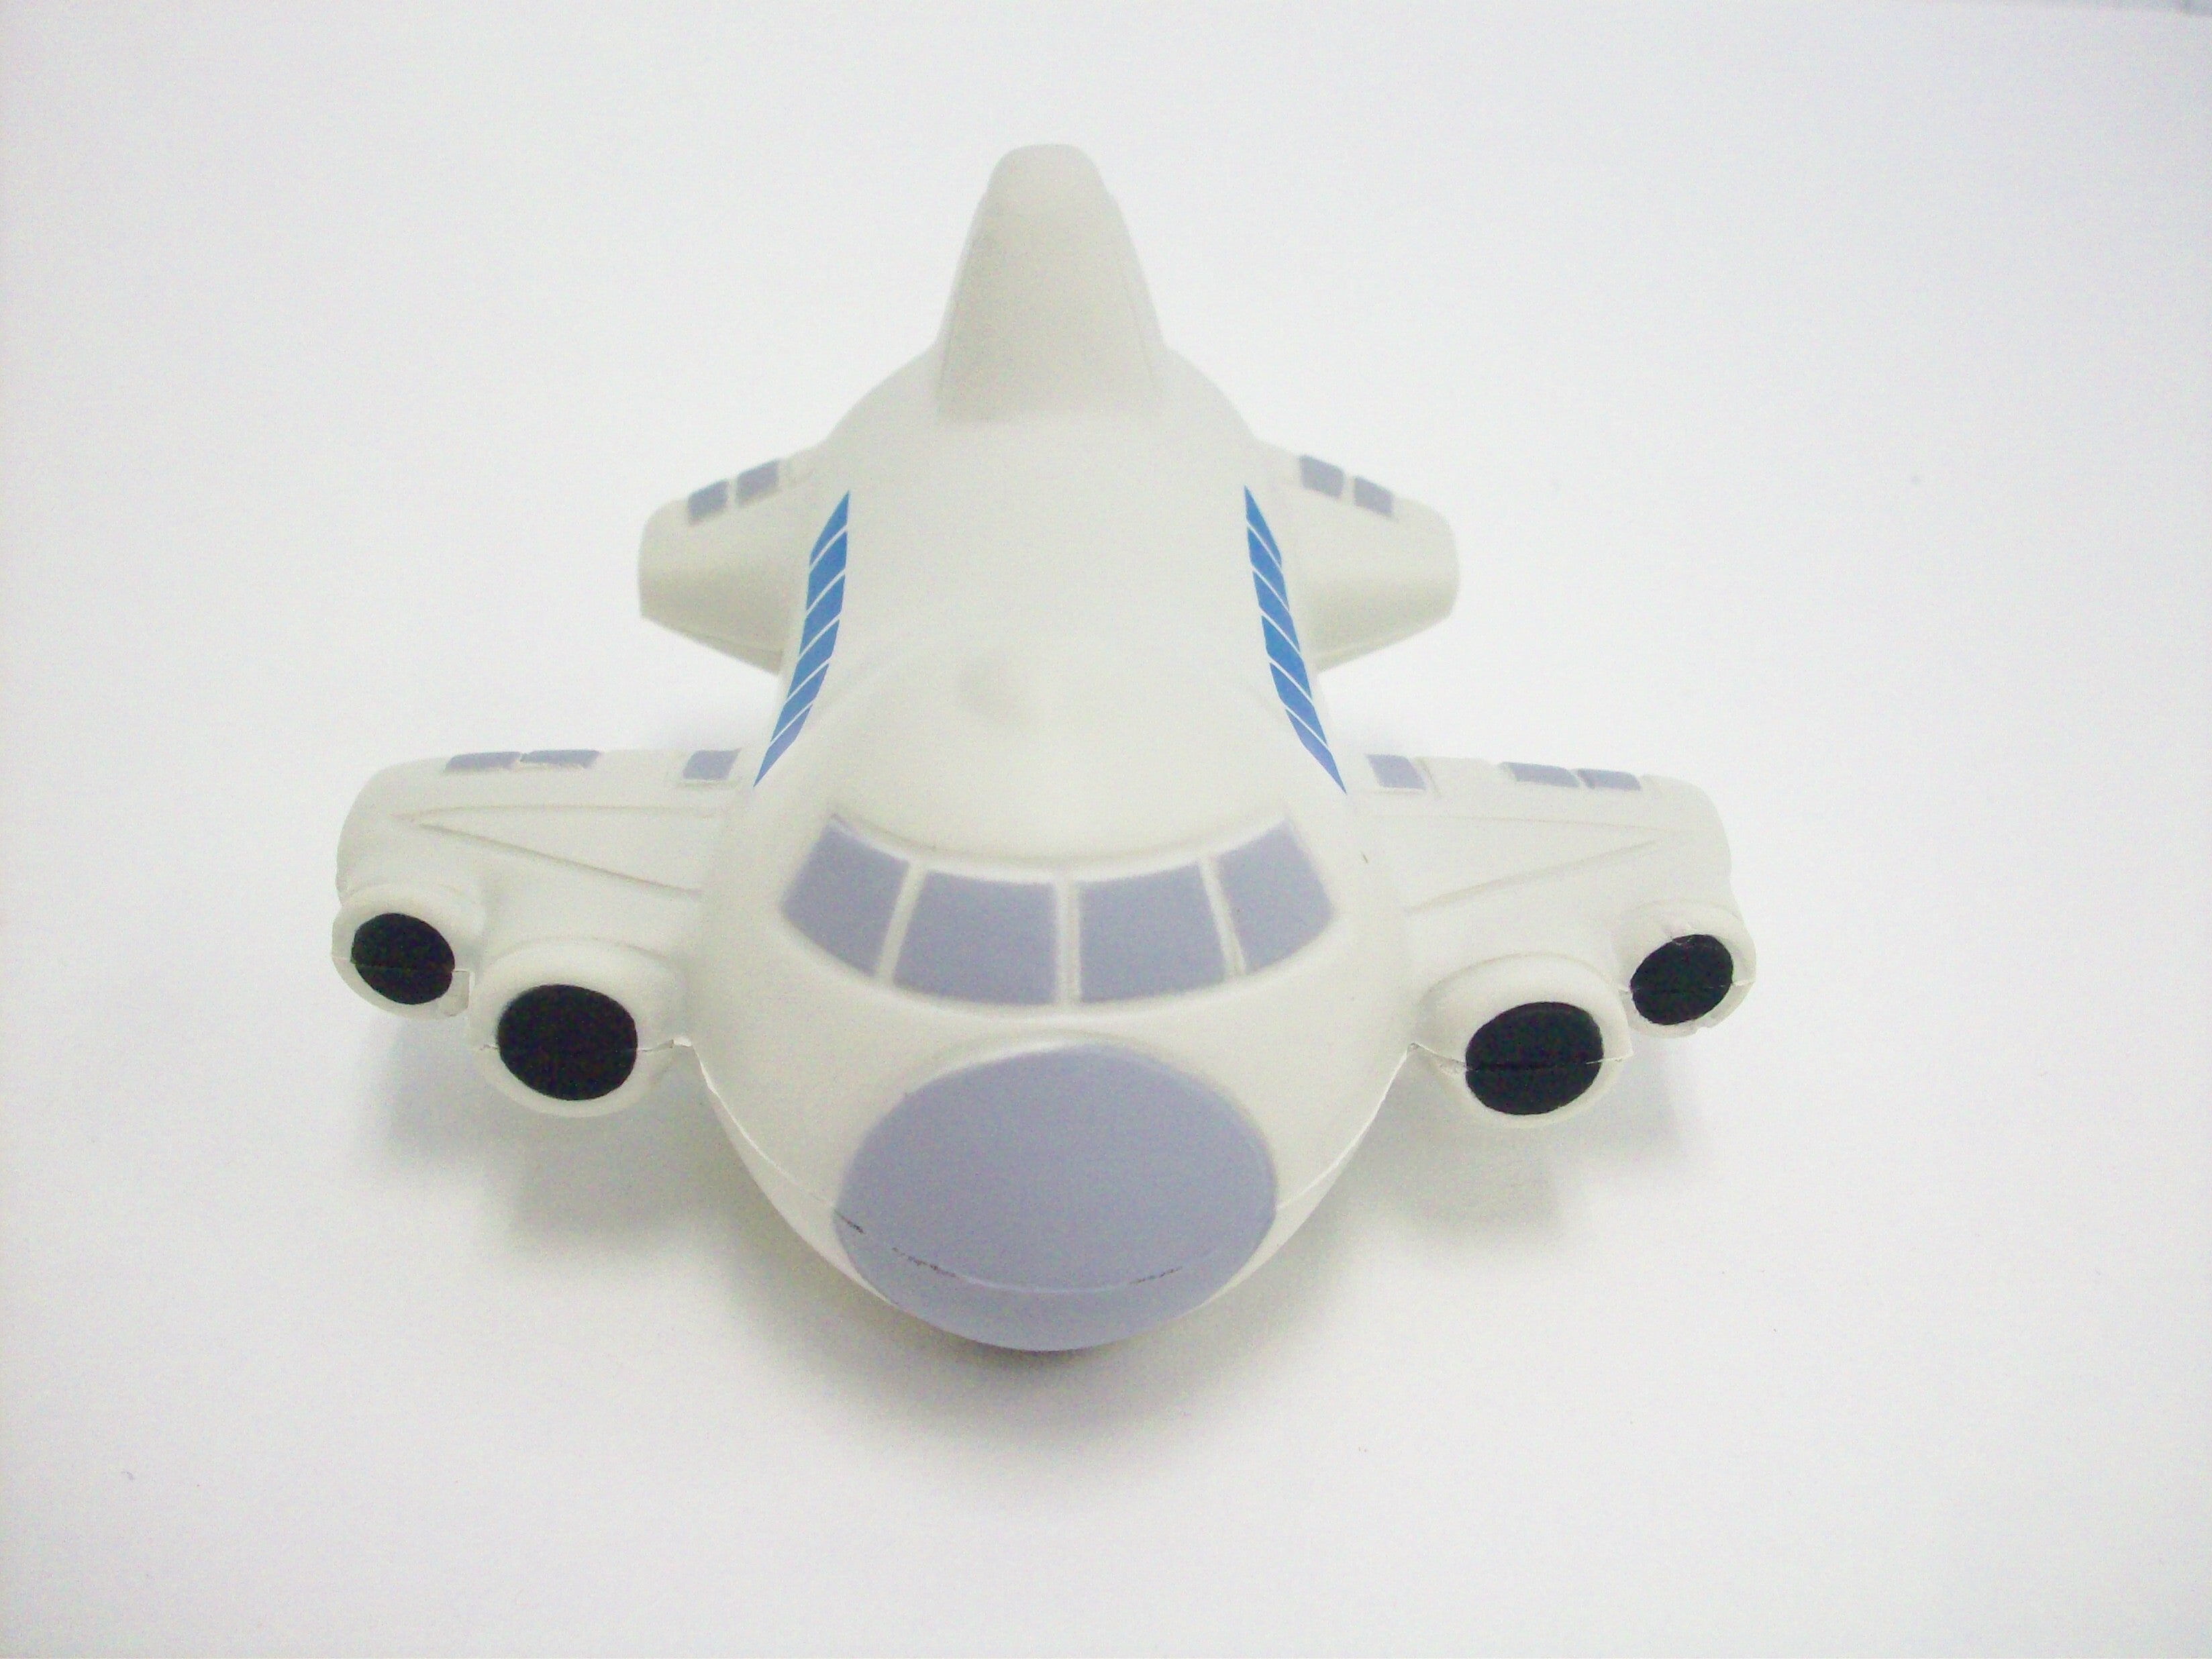 Stress Reliever FAA Airplane Small Front